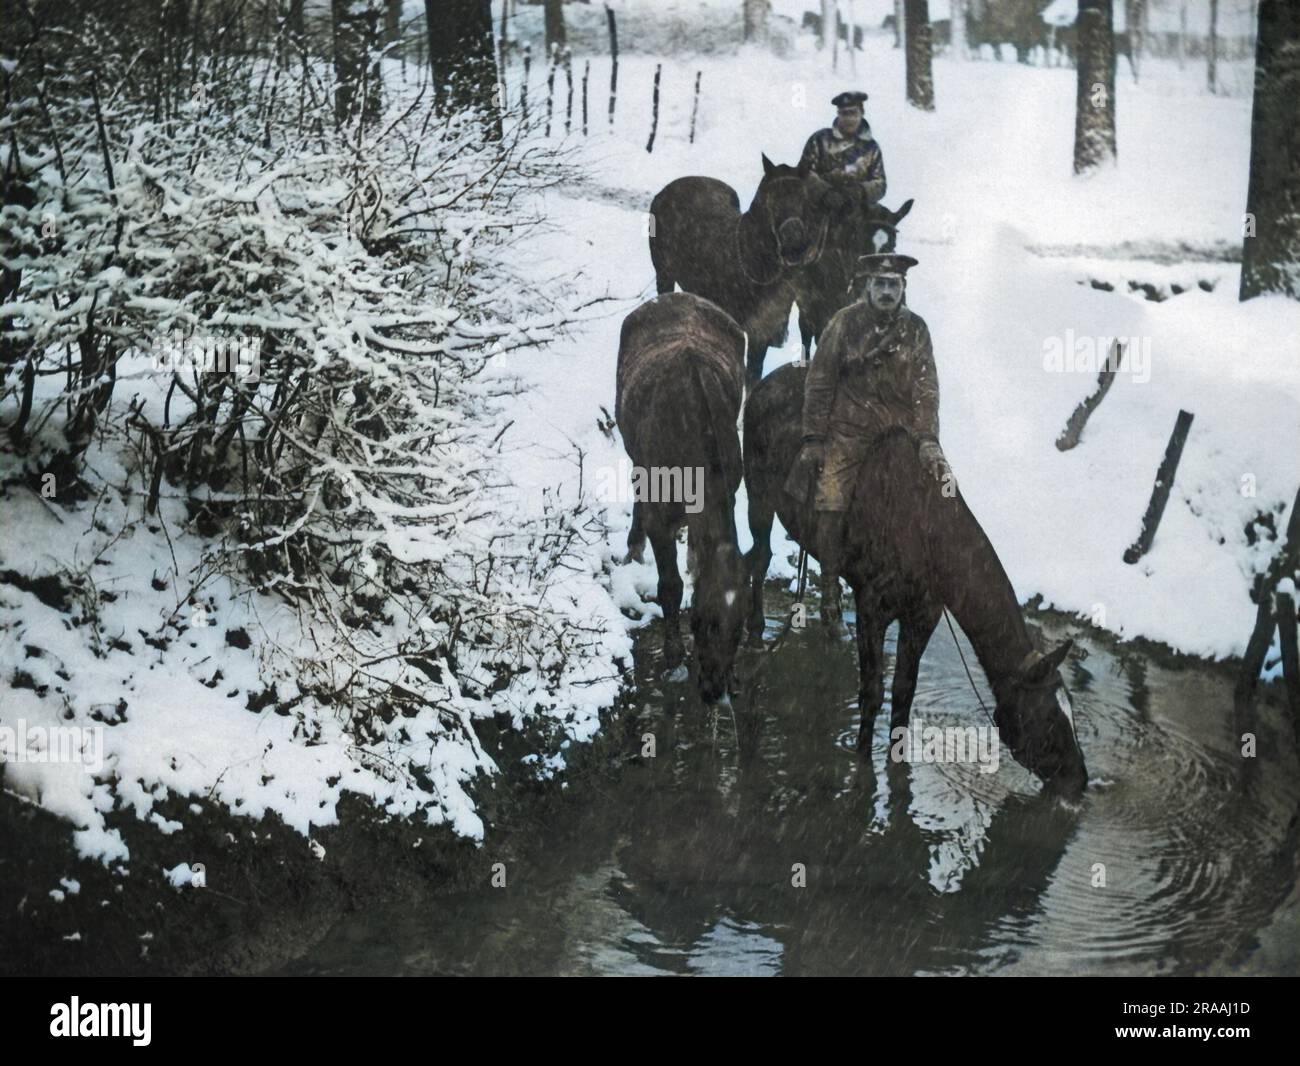 British soldiers on horseback in the snow on the Western Front during World War One, giving their horses time for a drink of water.     Date: circa 1916 Stock Photo